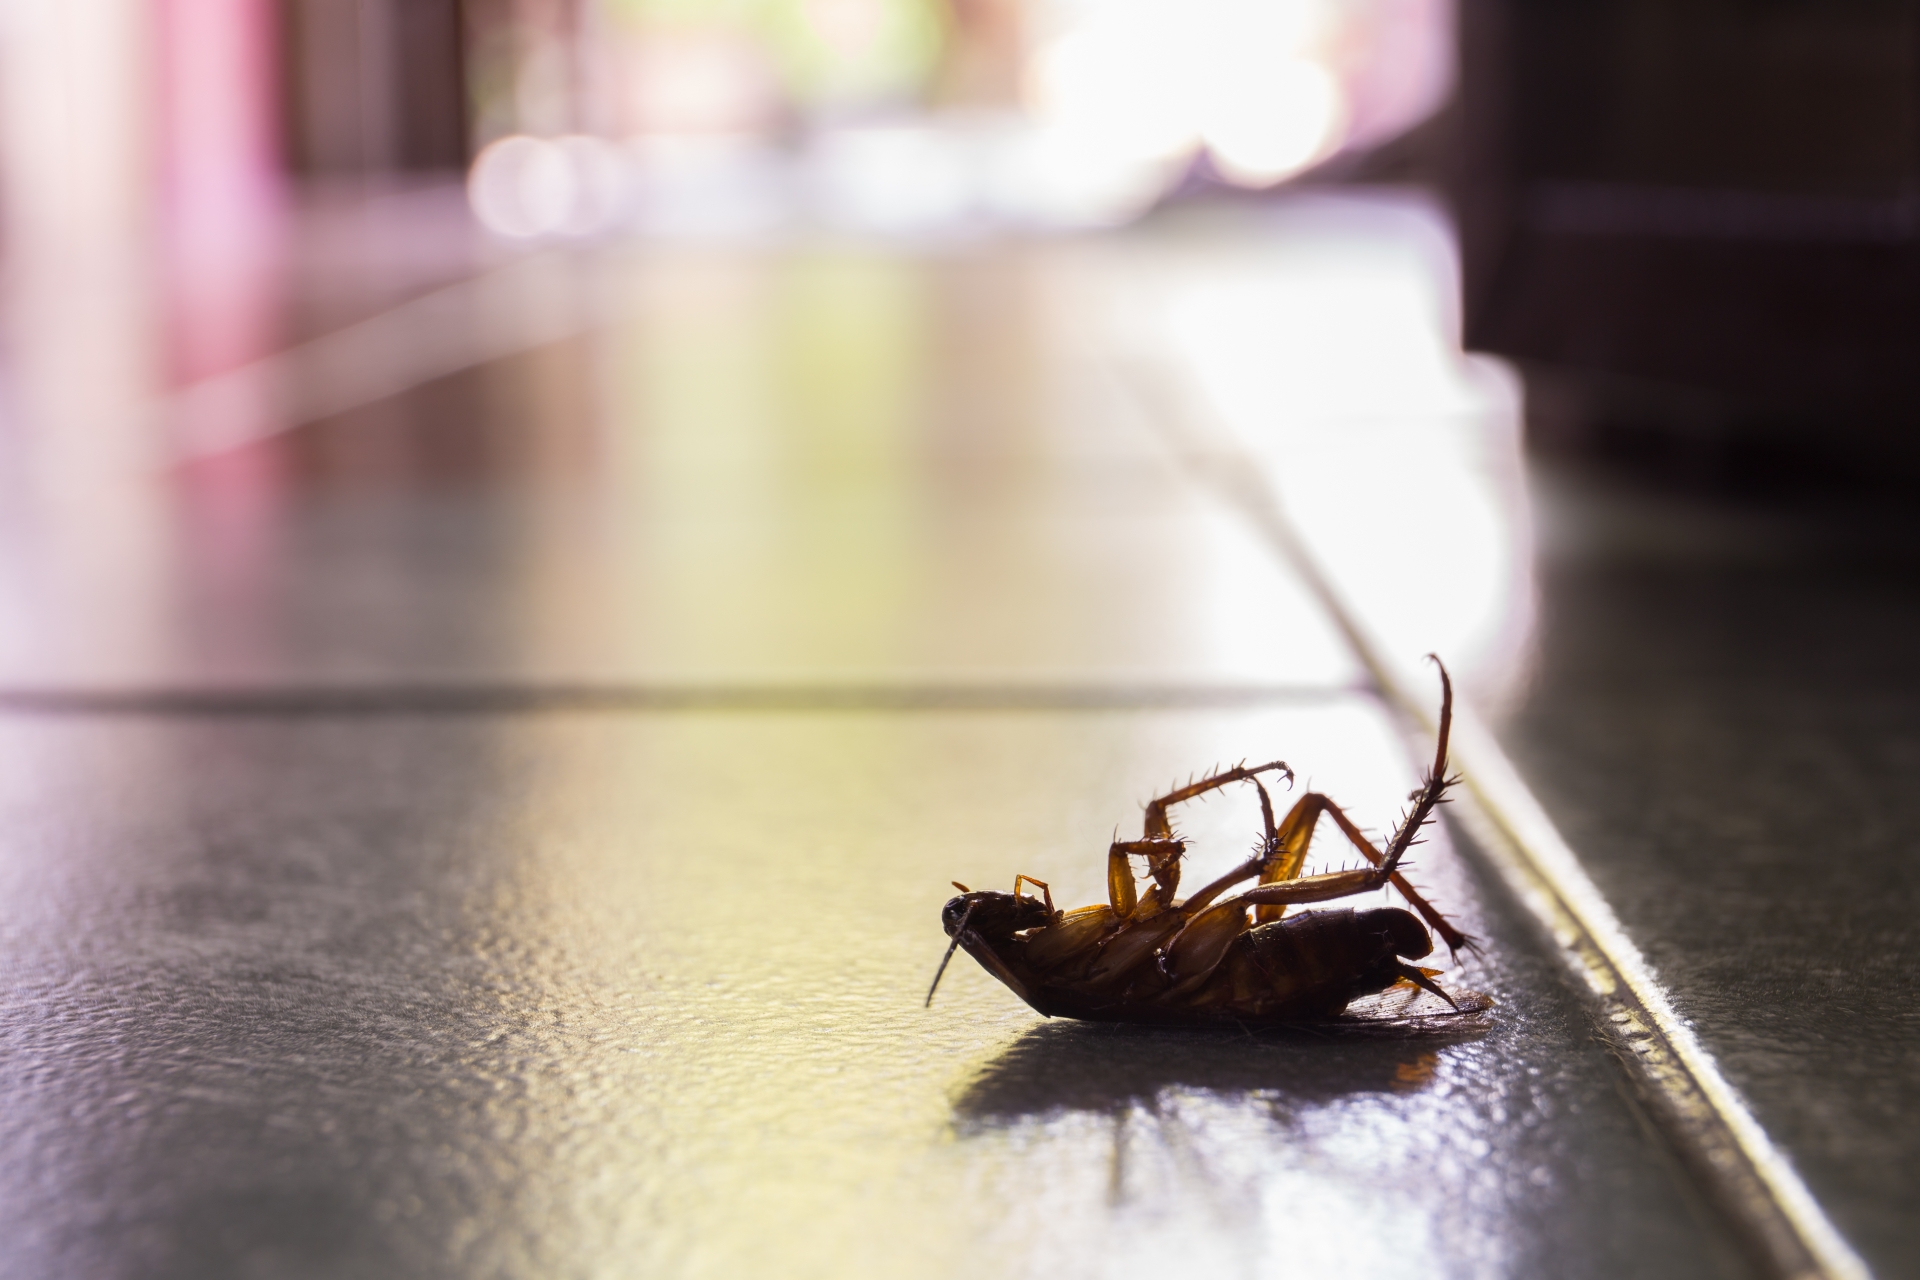 Cockroach Control, Pest Control in Shepperton, Upper Halliford, TW17. Call Now 020 8166 9746